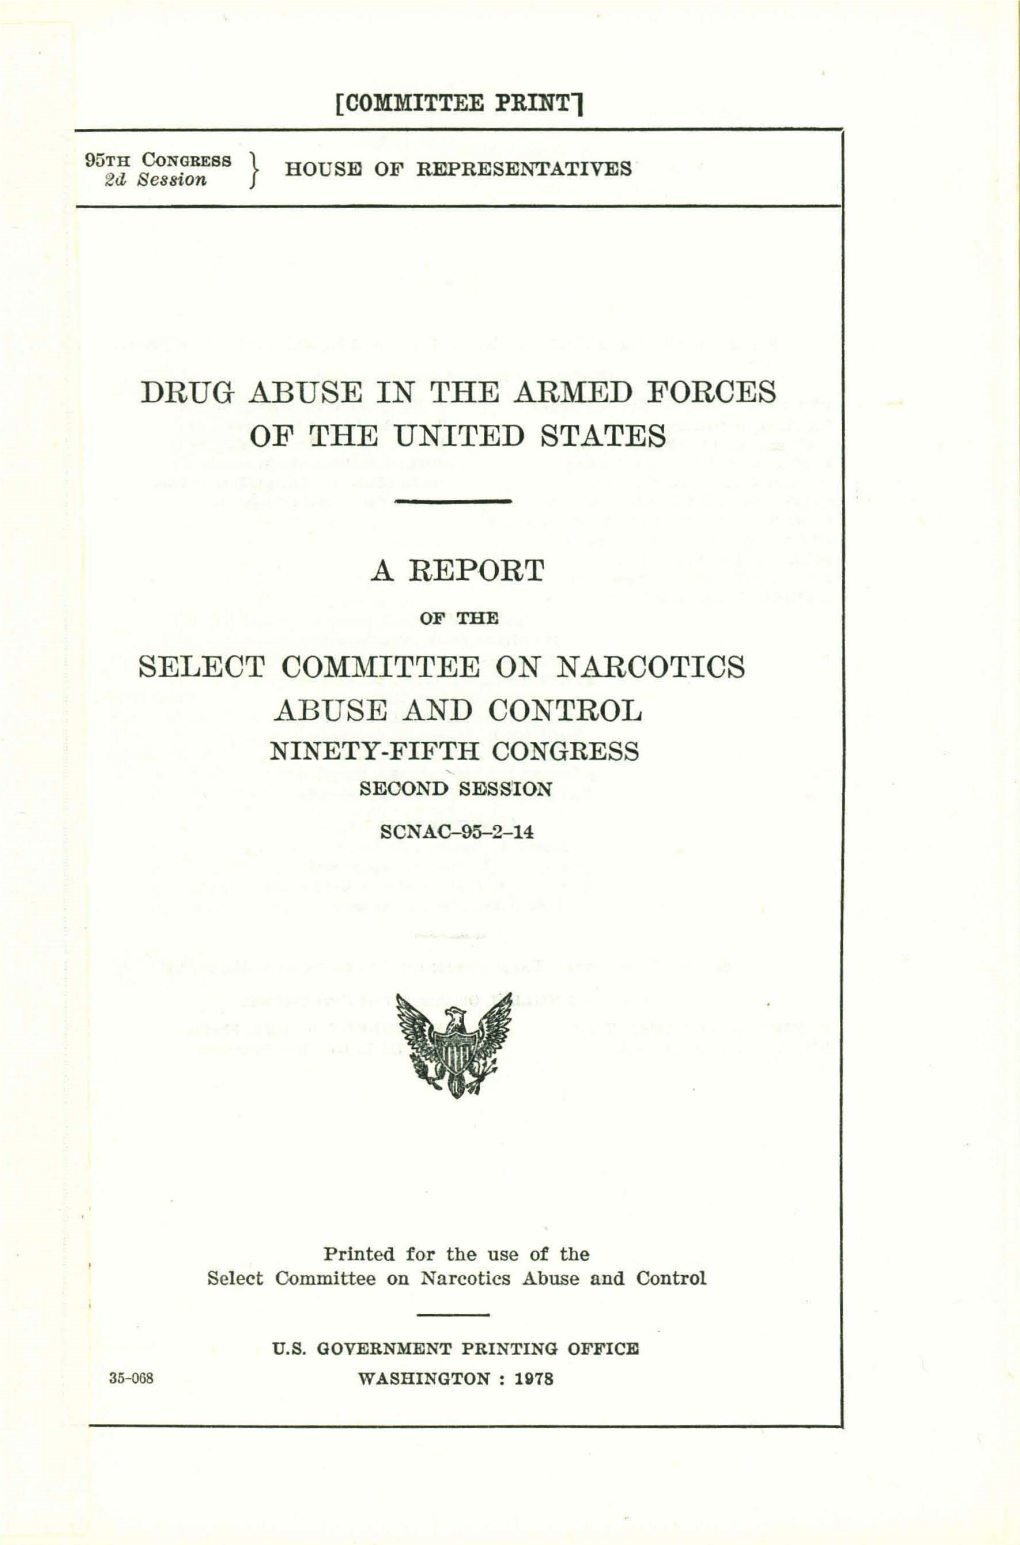 Drug Abuse in the Armed Forces of the United States